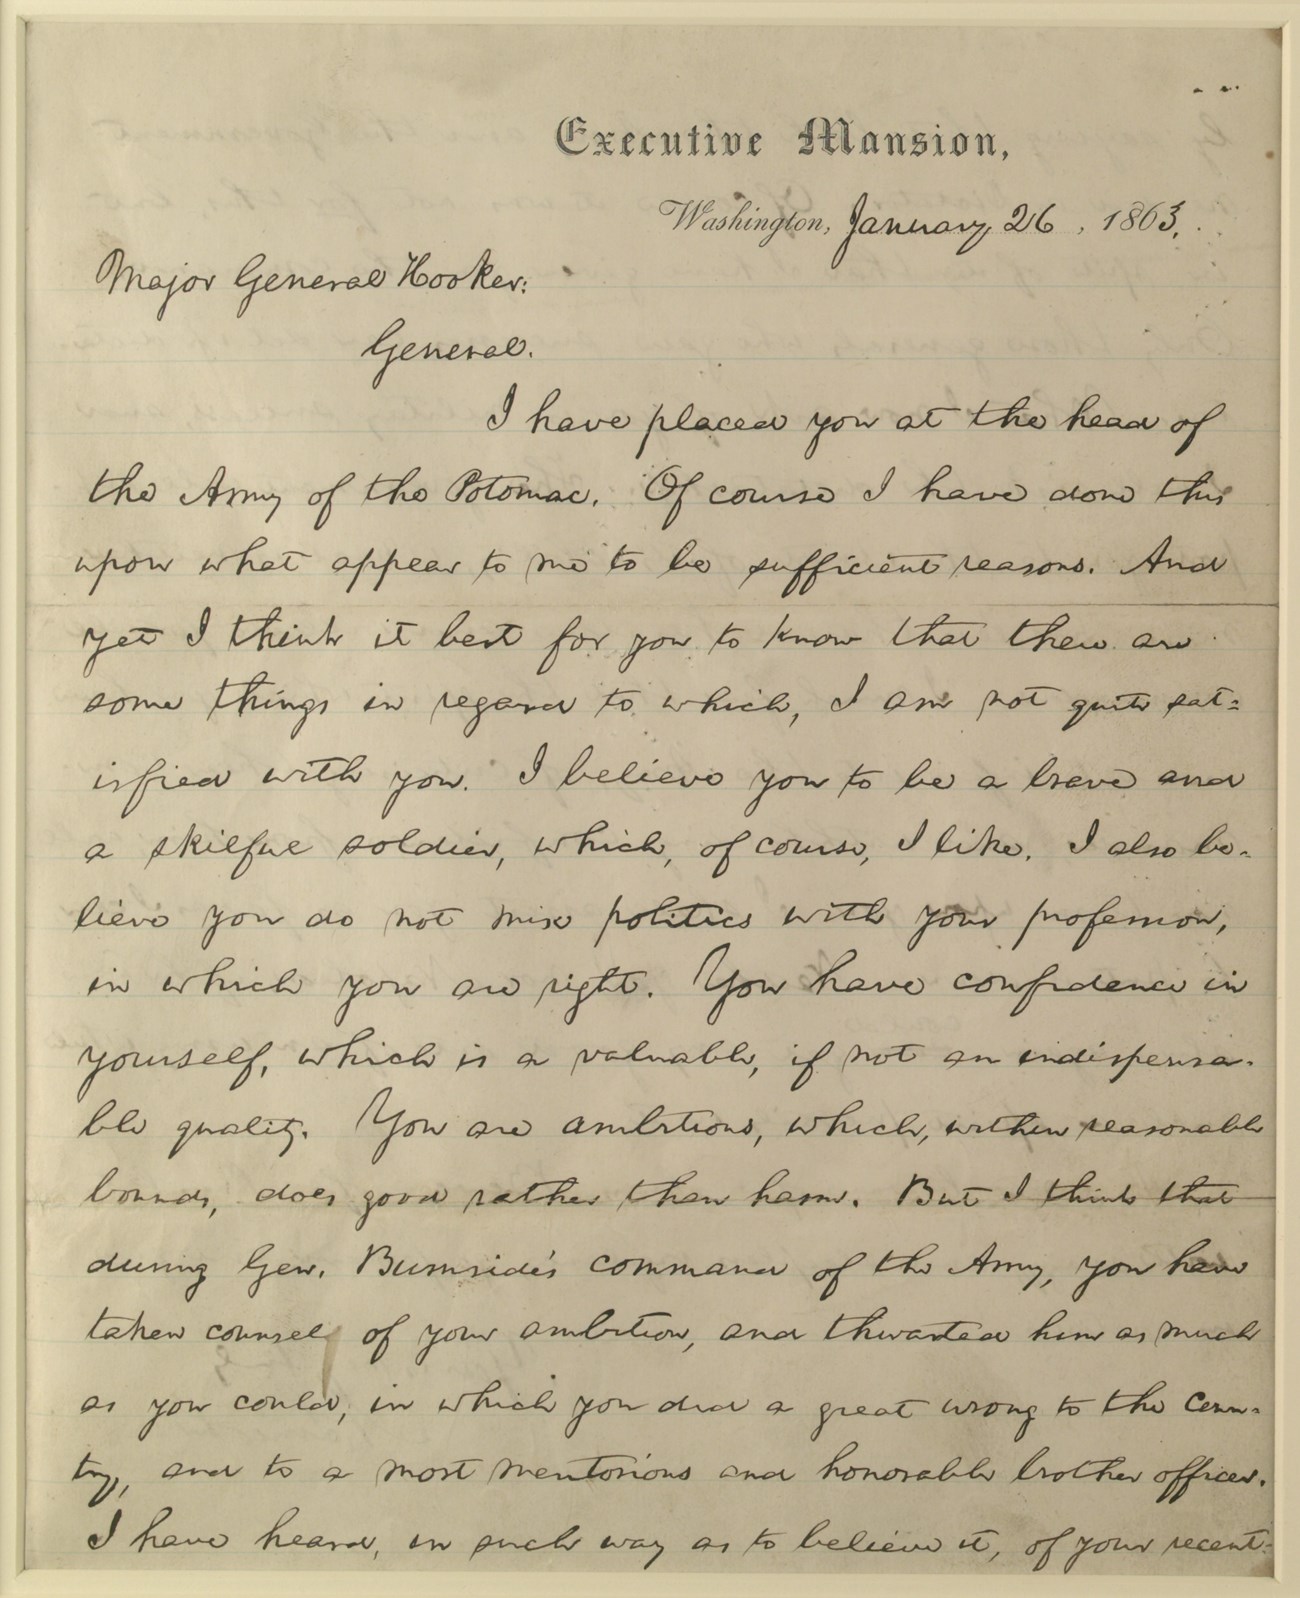 A digitized version of handwritten letter from Lincoln to Hooker.